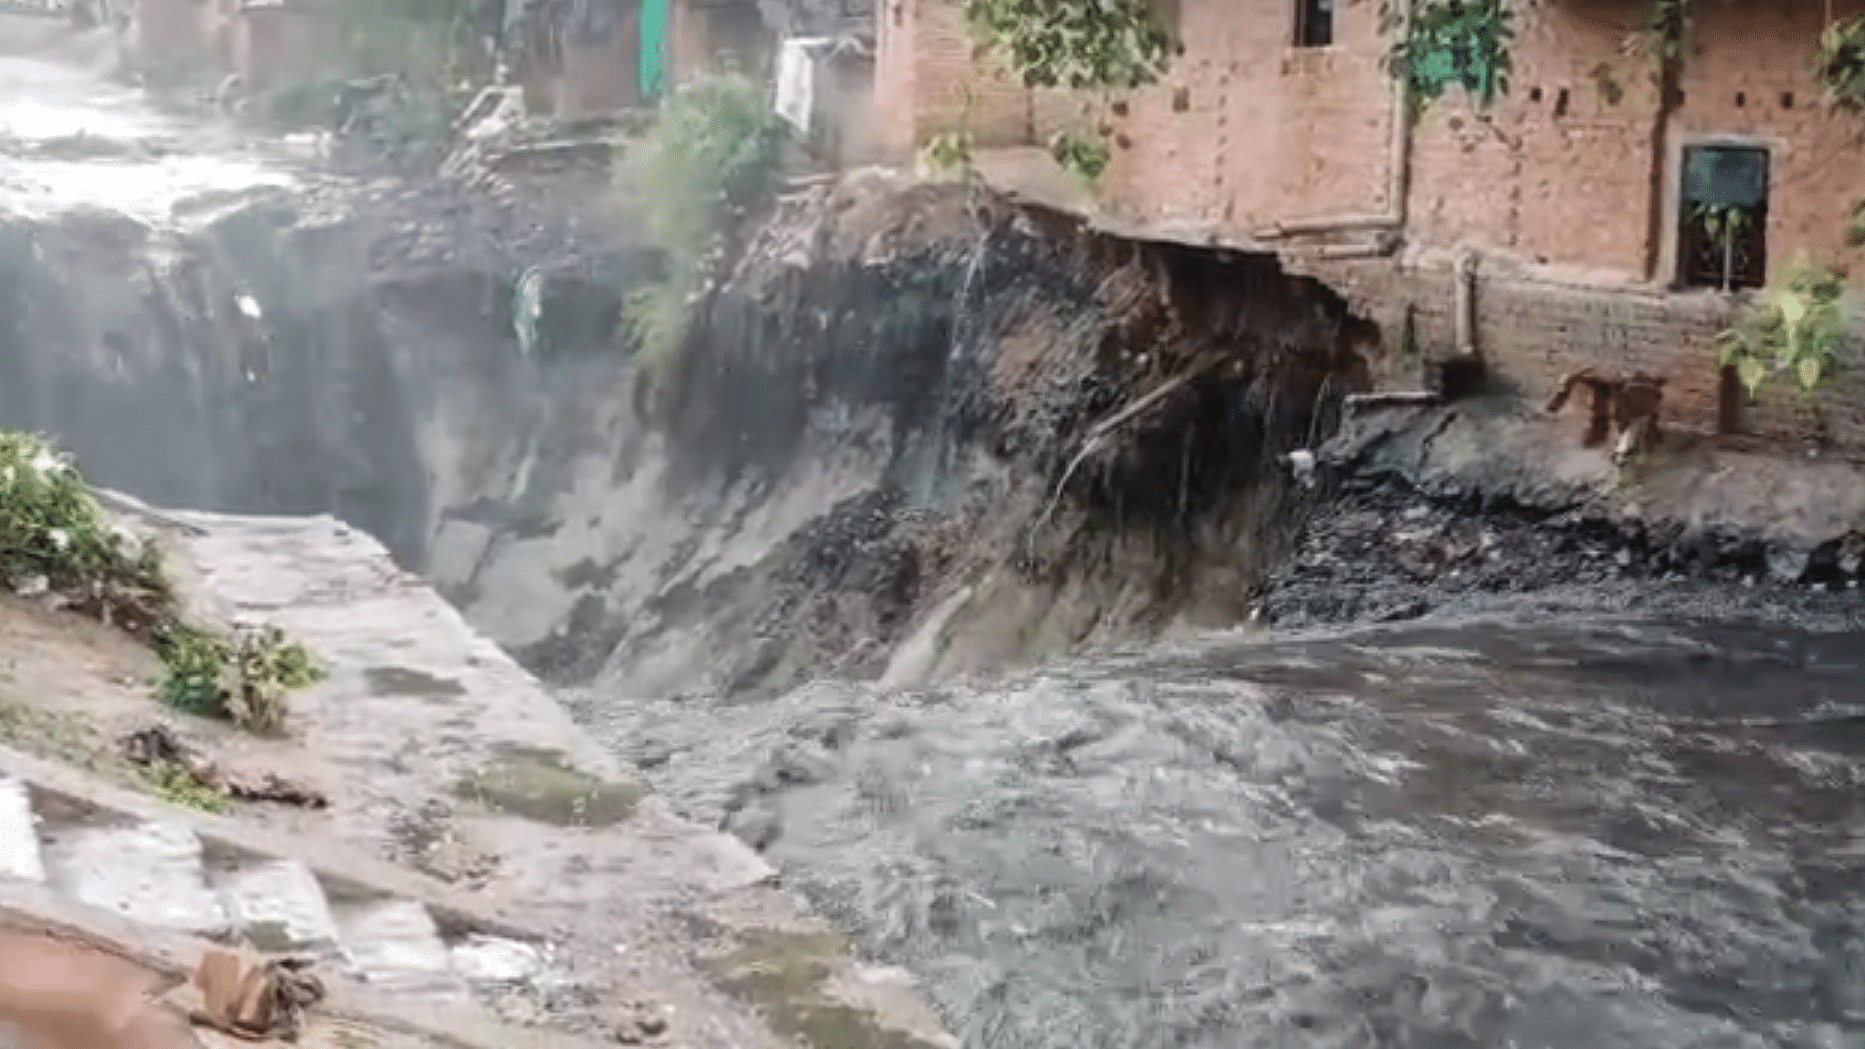 Atleast 10 homes in New Delhi’s ITO area was washed away on Sunday, 19 July as a waterlogged road collapsed in the Anna Nagar slum area.